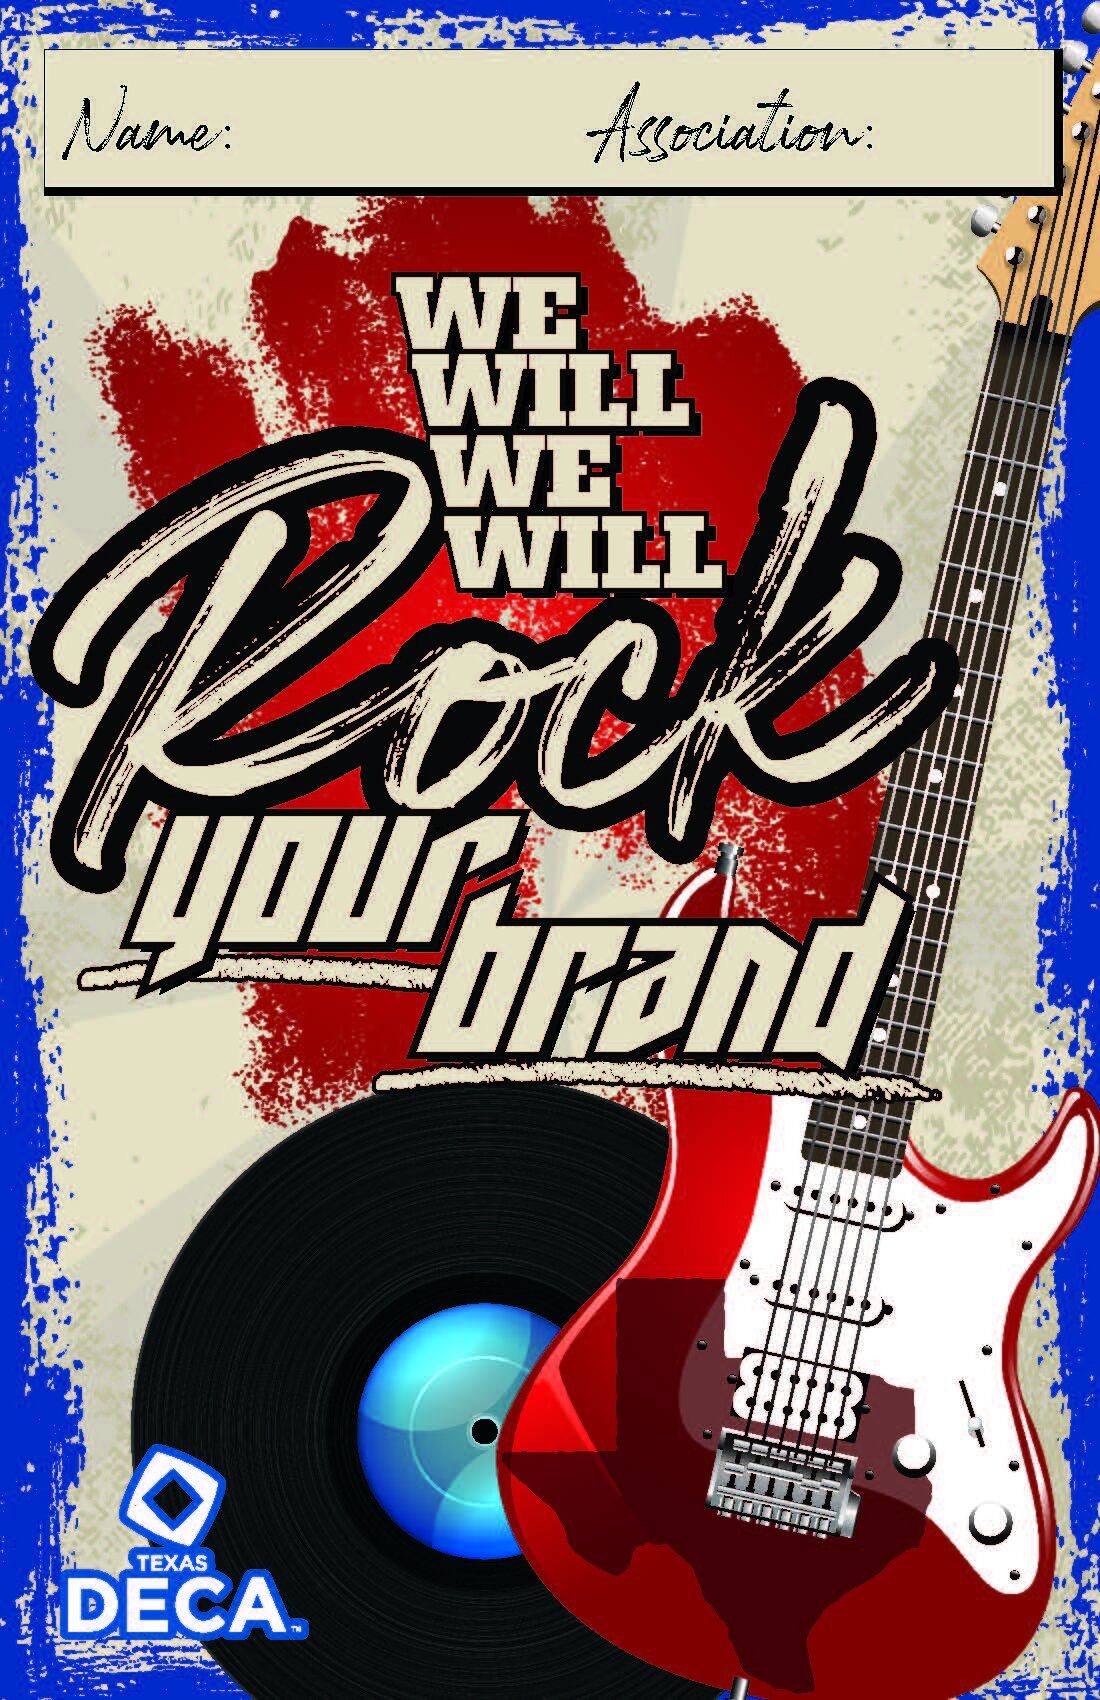 We+Will+Rock+Your+Brand_Page_1.jpg